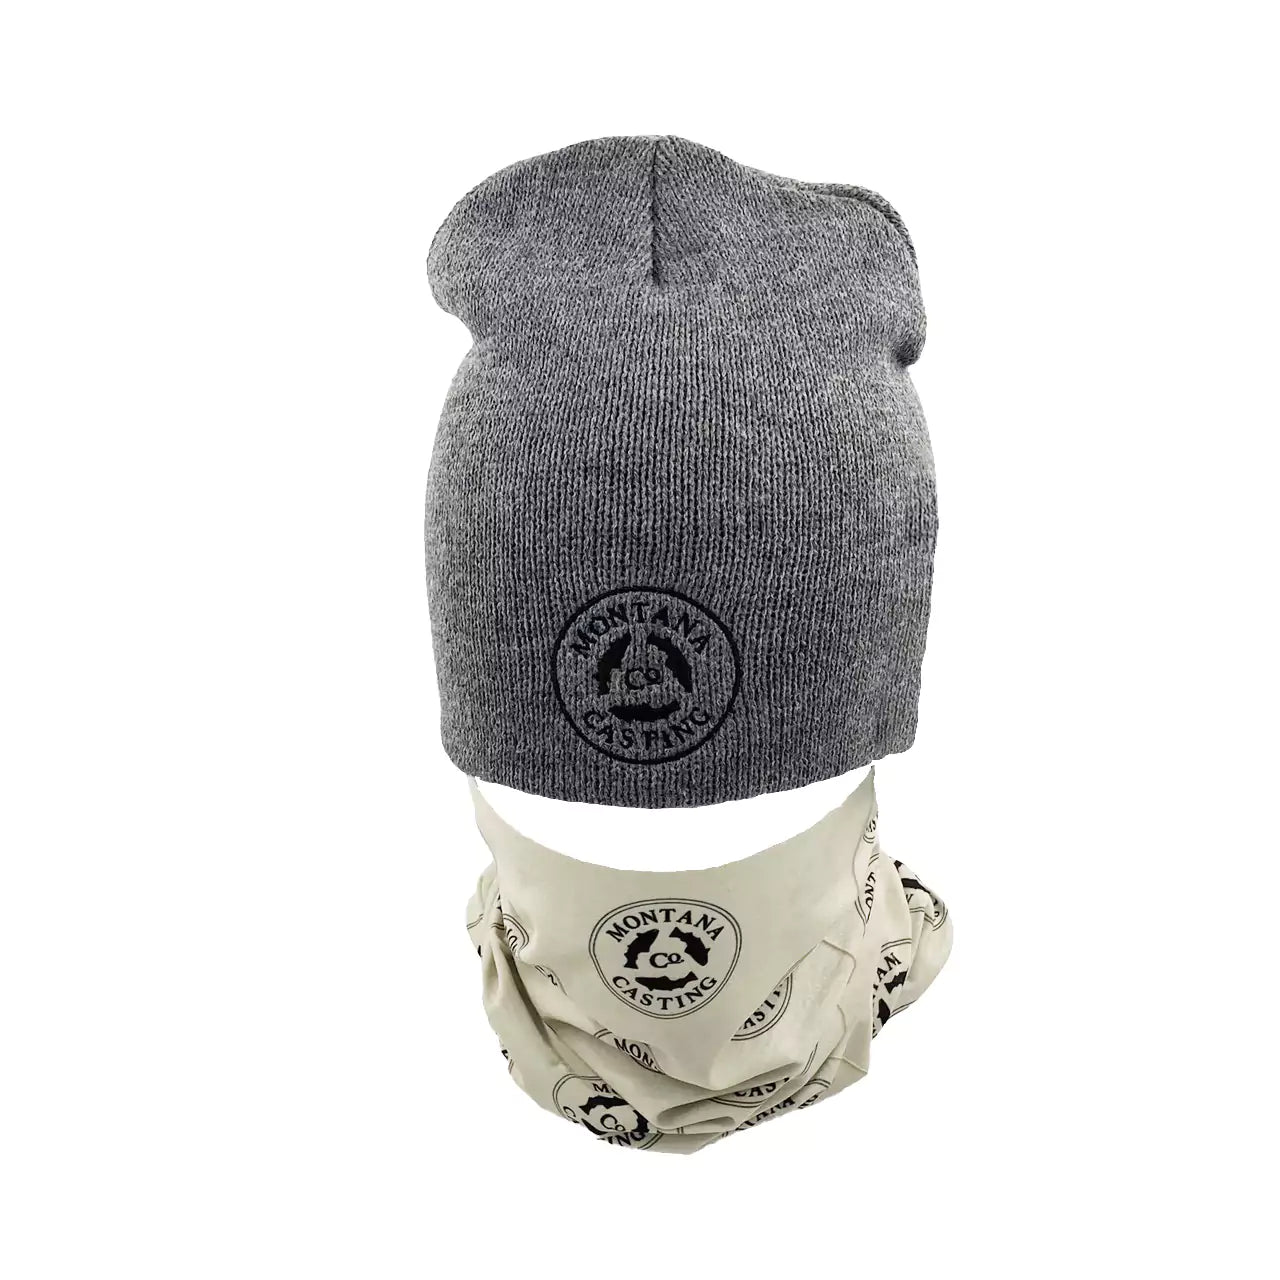 Montana Casting Co. Neck Gaiter Shown with Grey Beanie